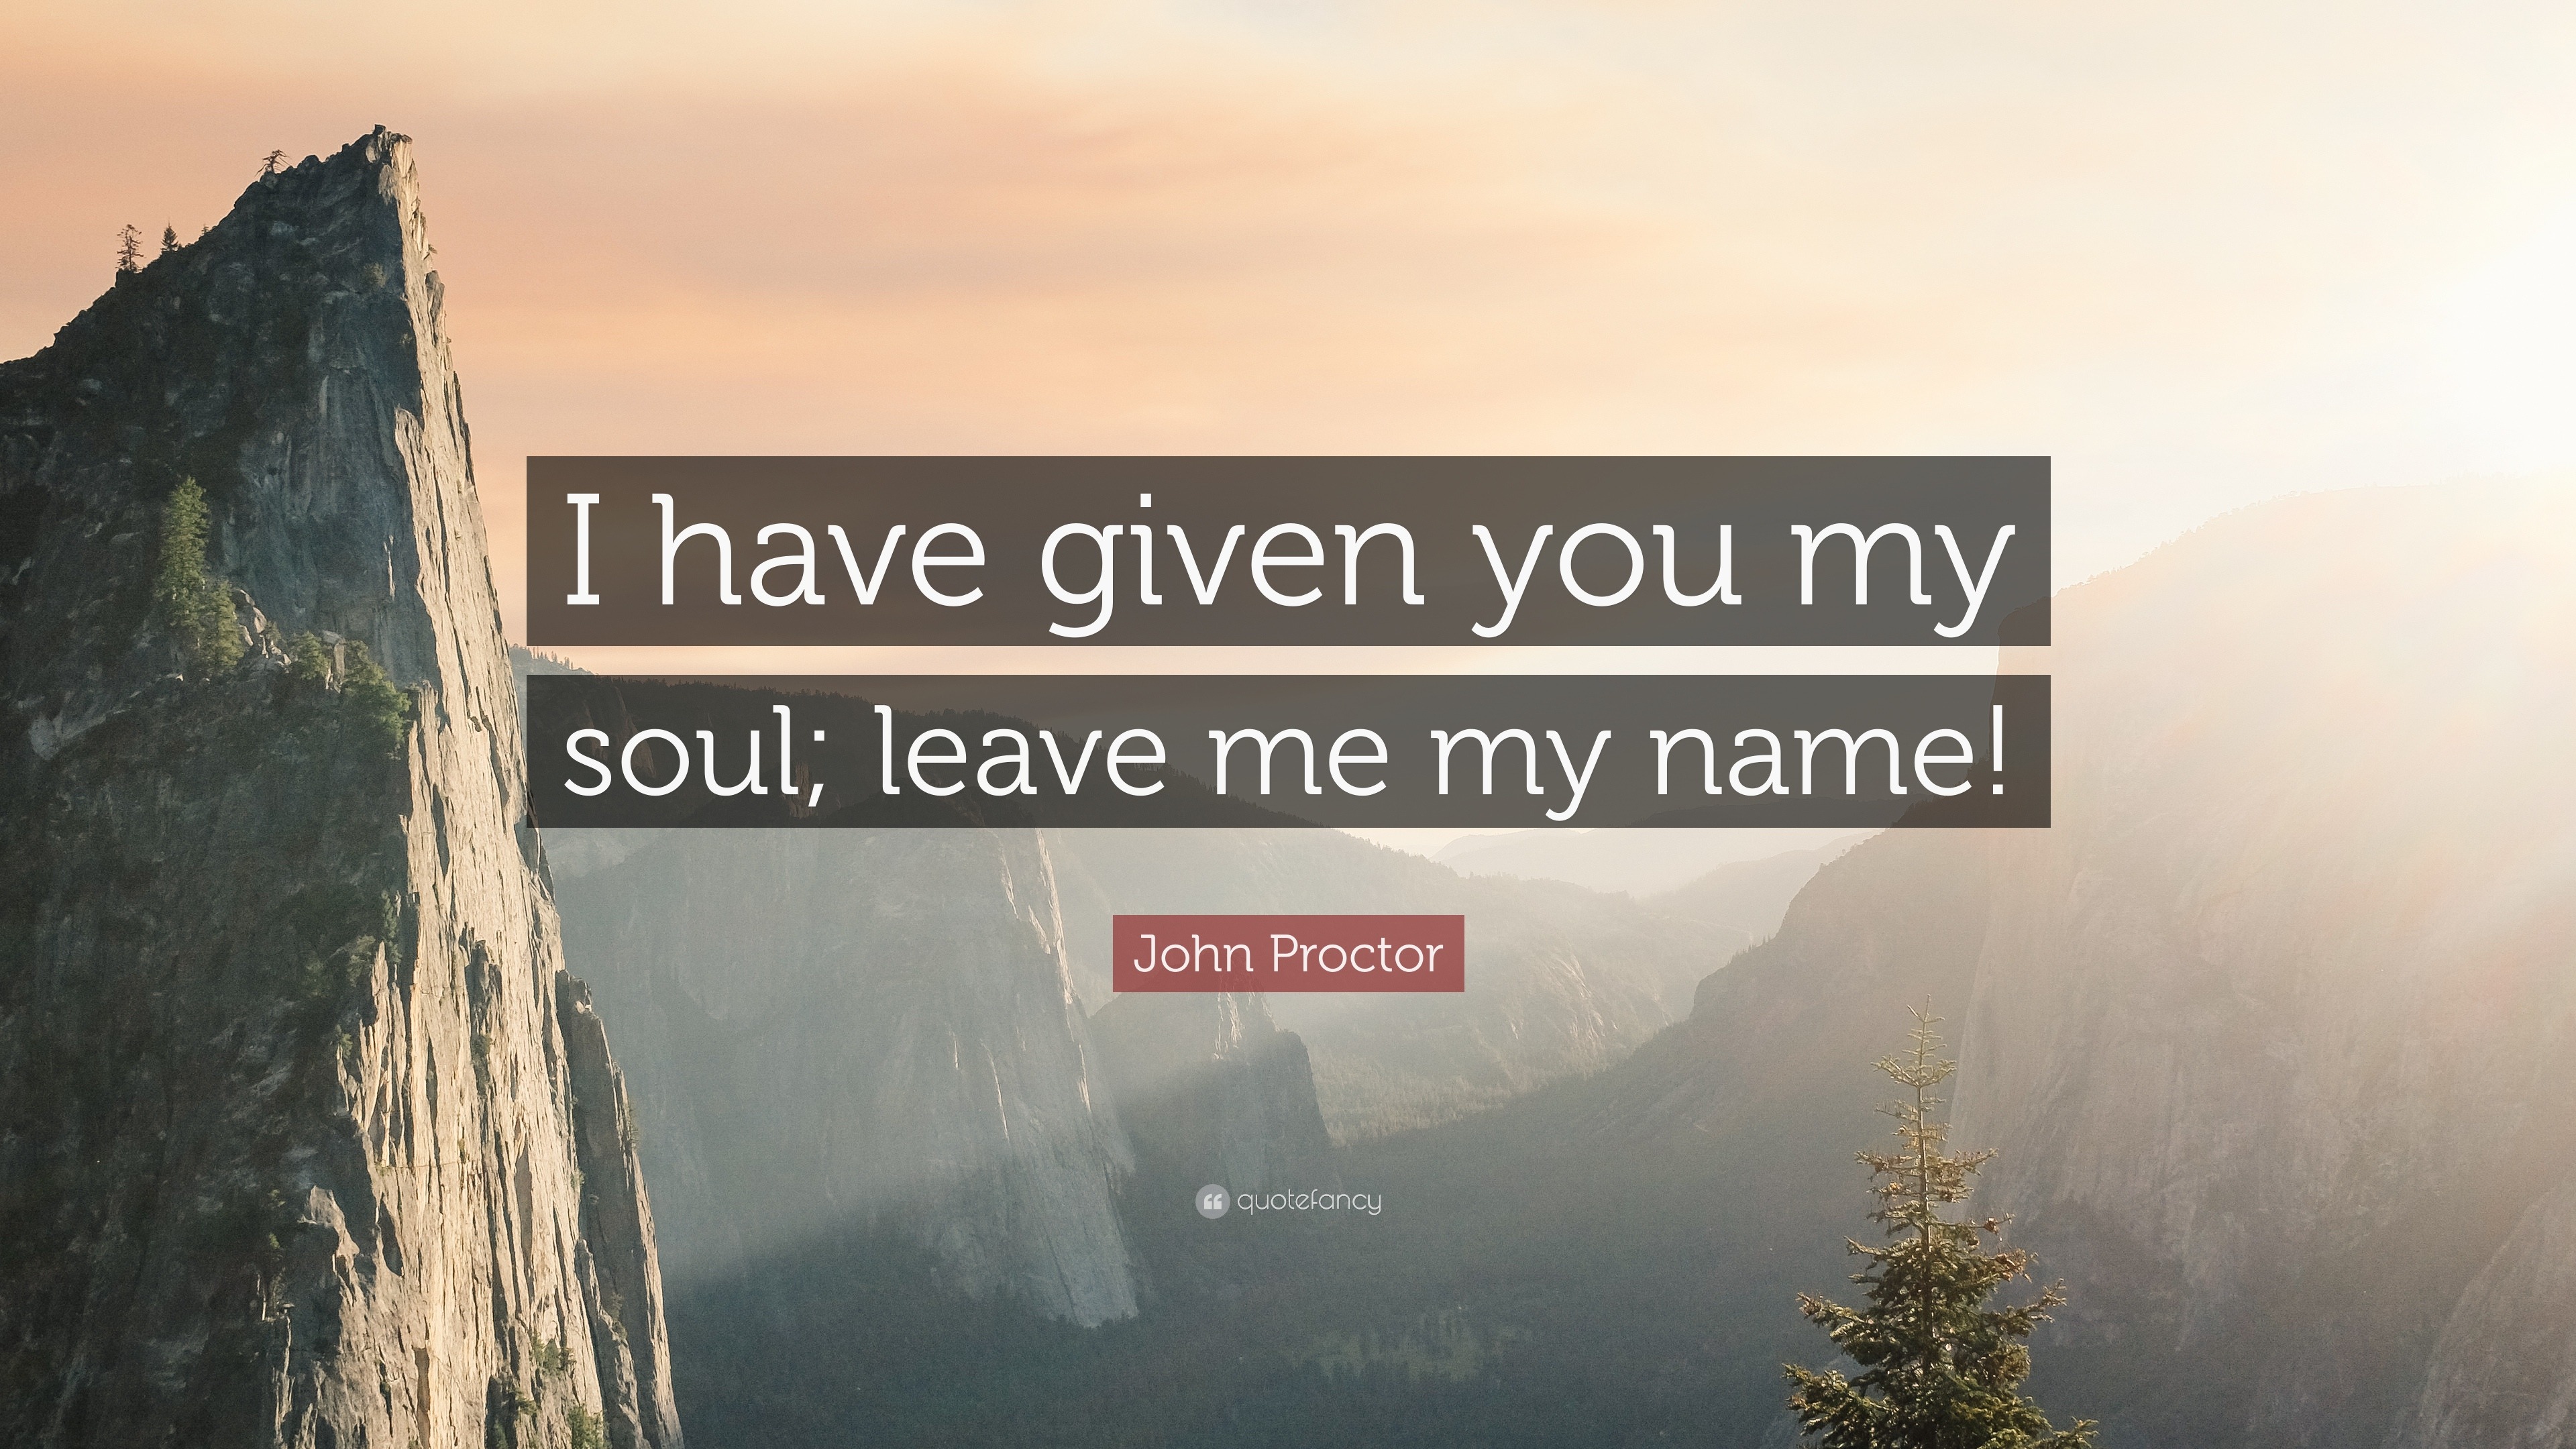  John Proctor Quotes of all time Check it out now 